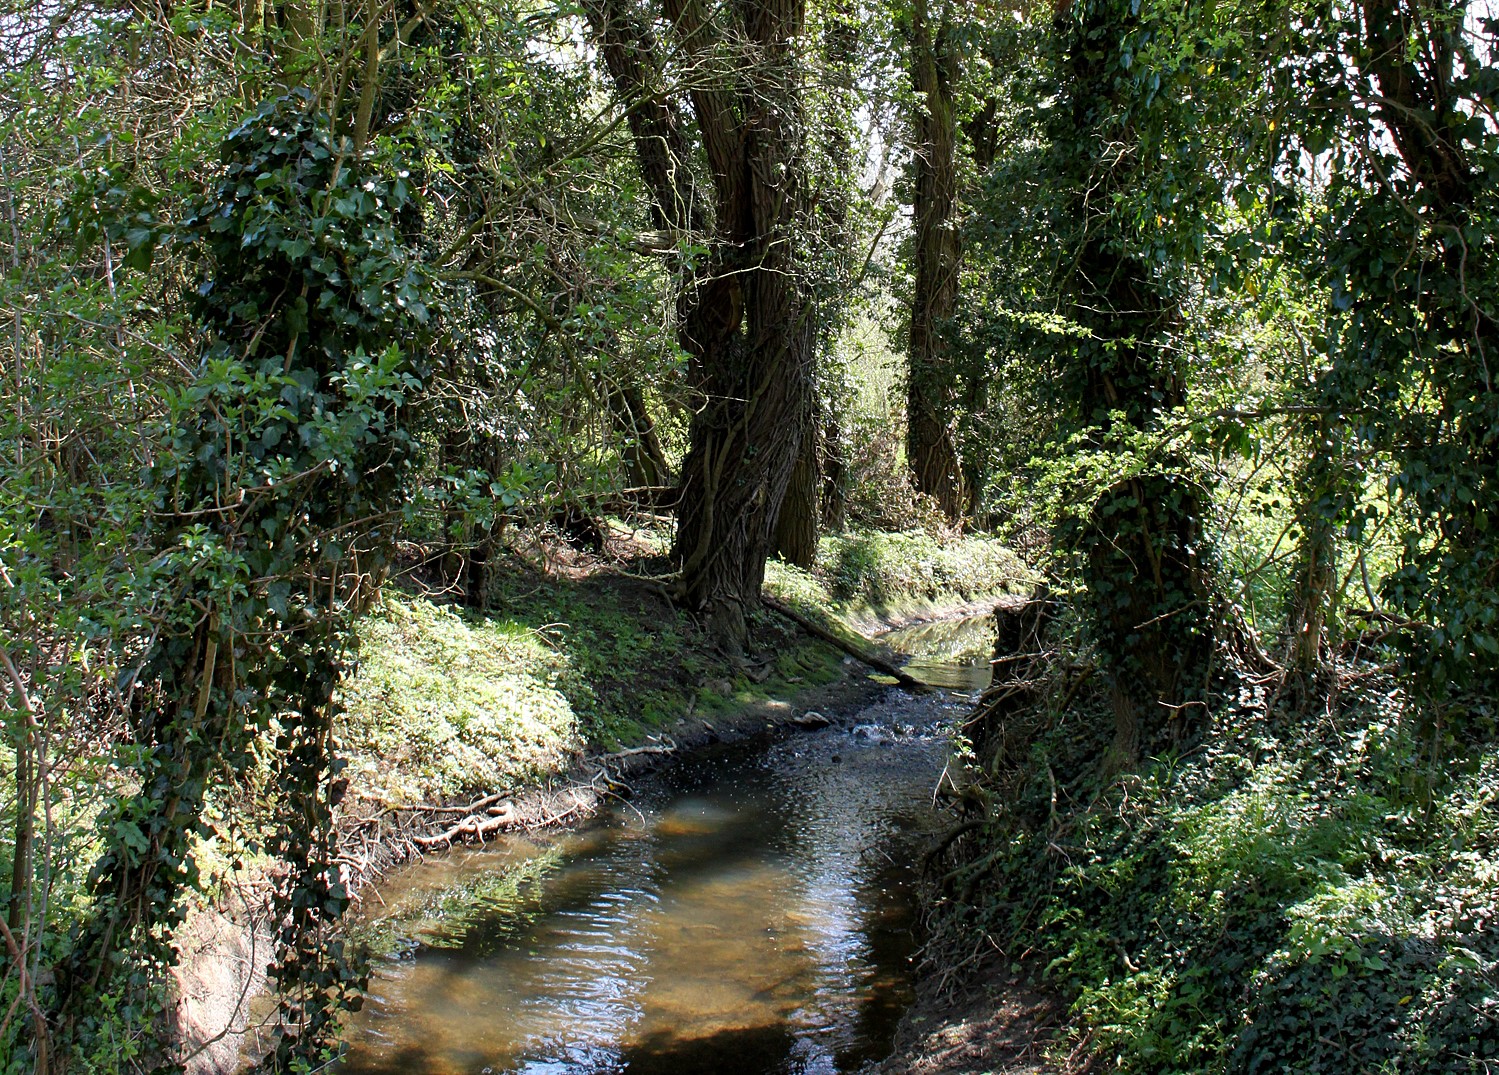 The river Arrow weaves through the trees